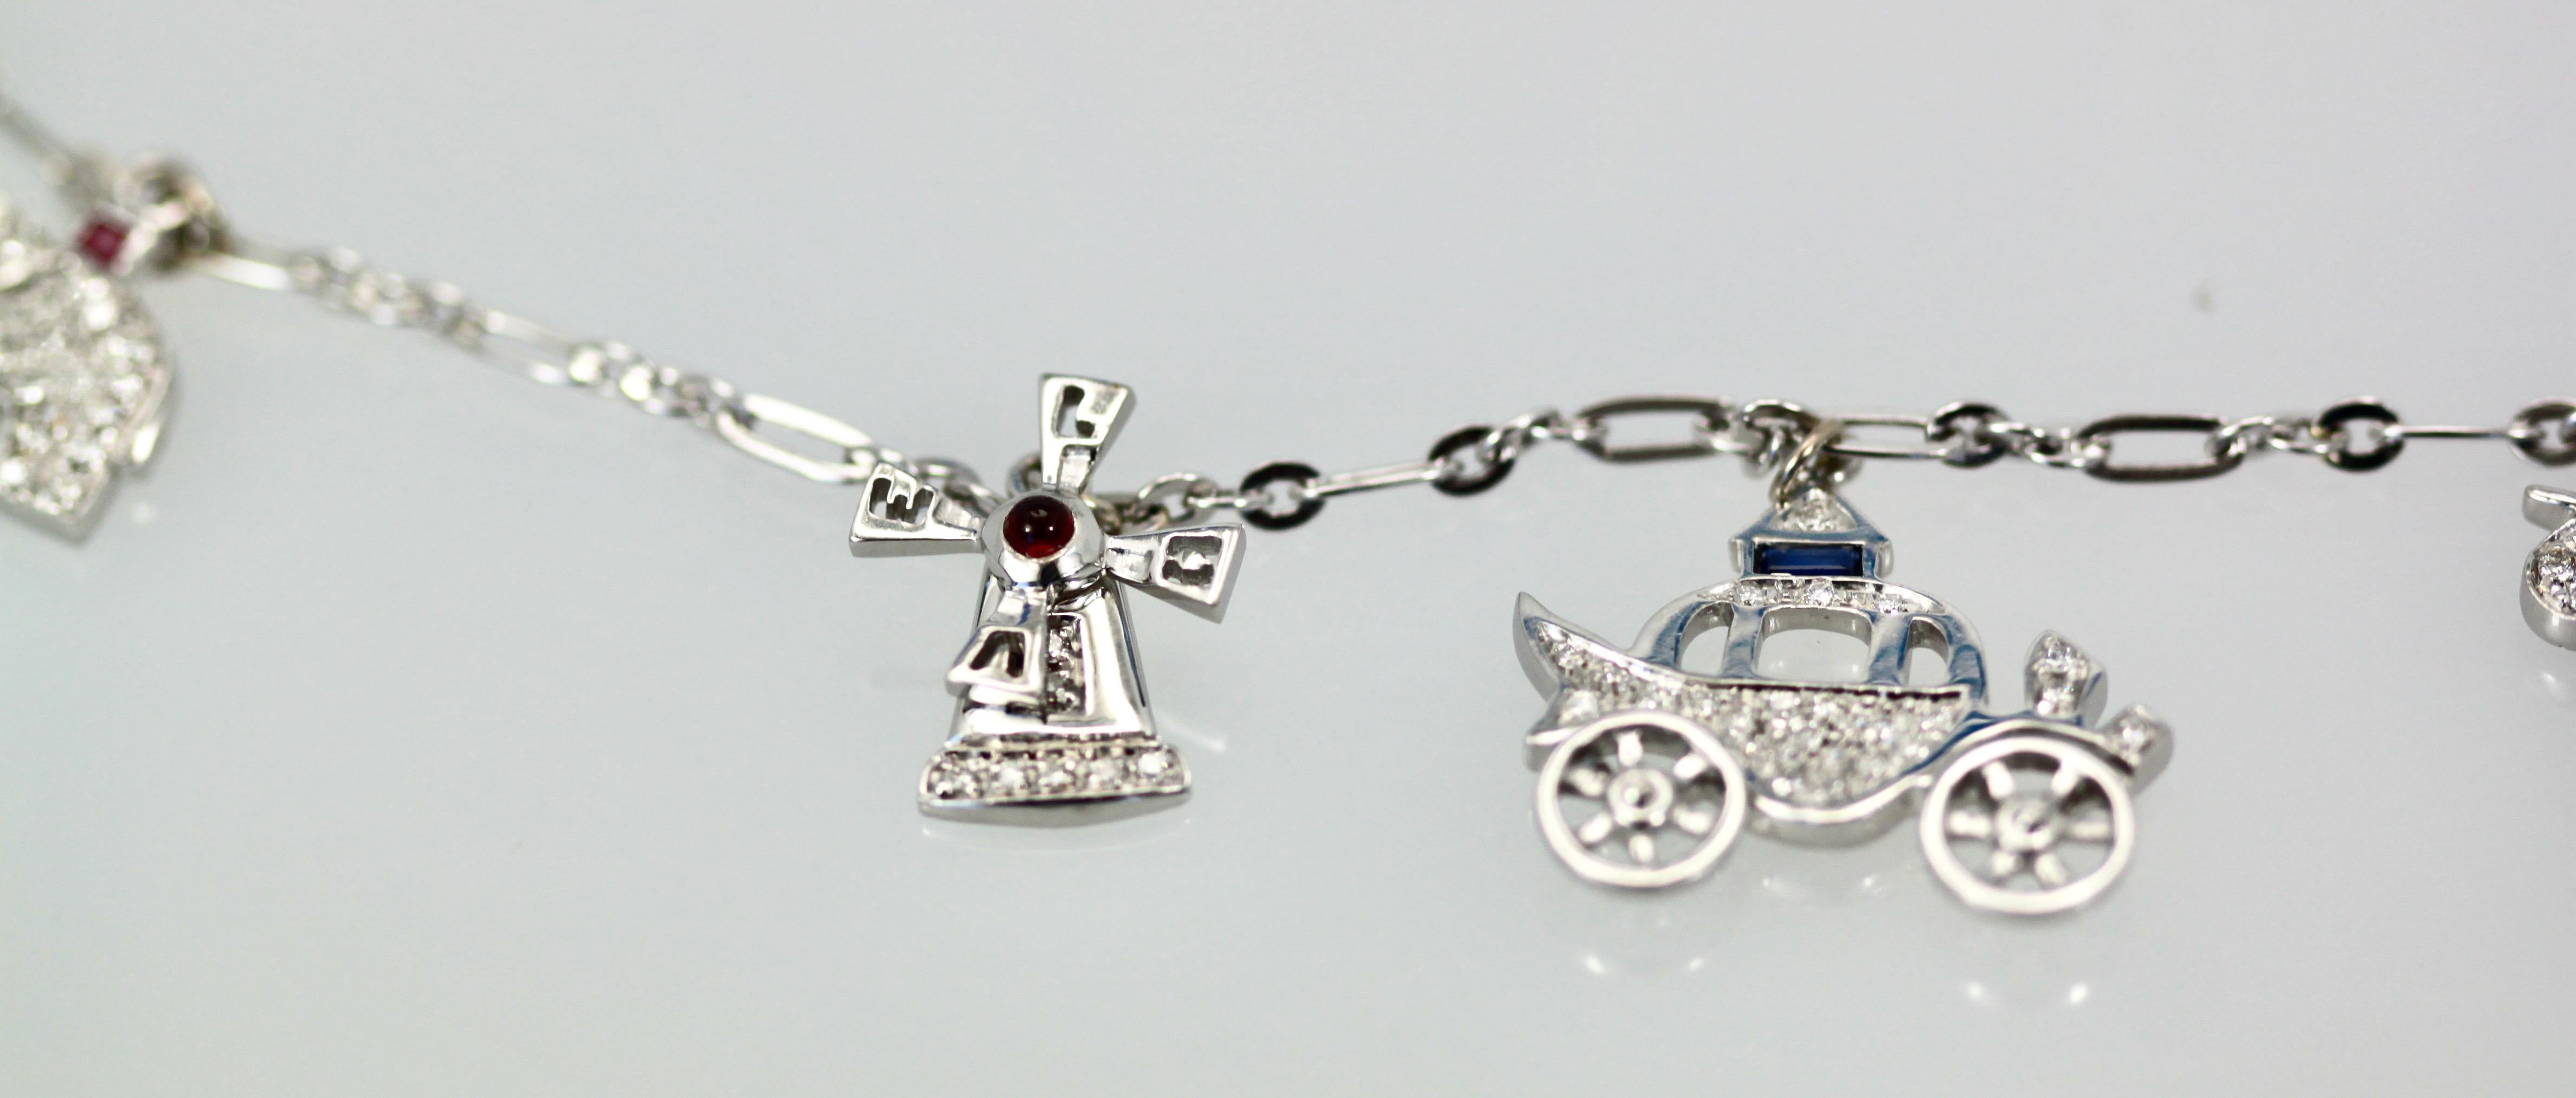 This gorgeous Deco Platinum charm necklace holds 5 unique Platinum charms:  A Horse with rider, an Elephant, a Hobo, A carriage, and a windmill with rotating veins. There are Diamonds and gemstones on these charms.  This comes out of Austria and is